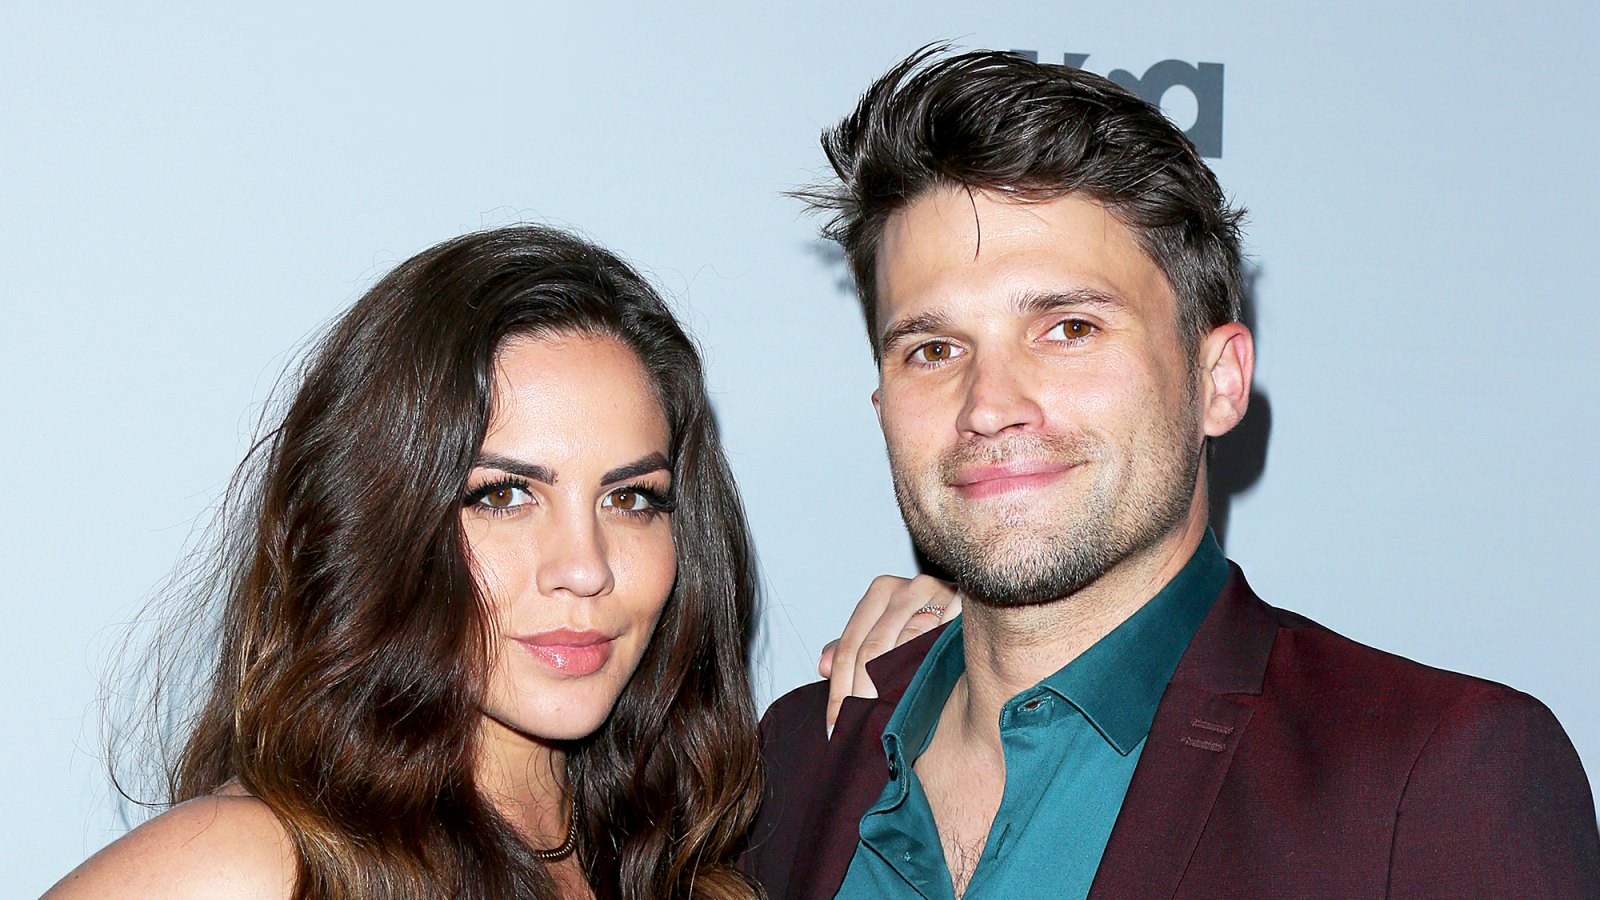 Katie Maloney and Tom Schwartz attend NBCUniversal's press junket at Beauty & Essex on November 13, 2017 in Los Angeles, California.